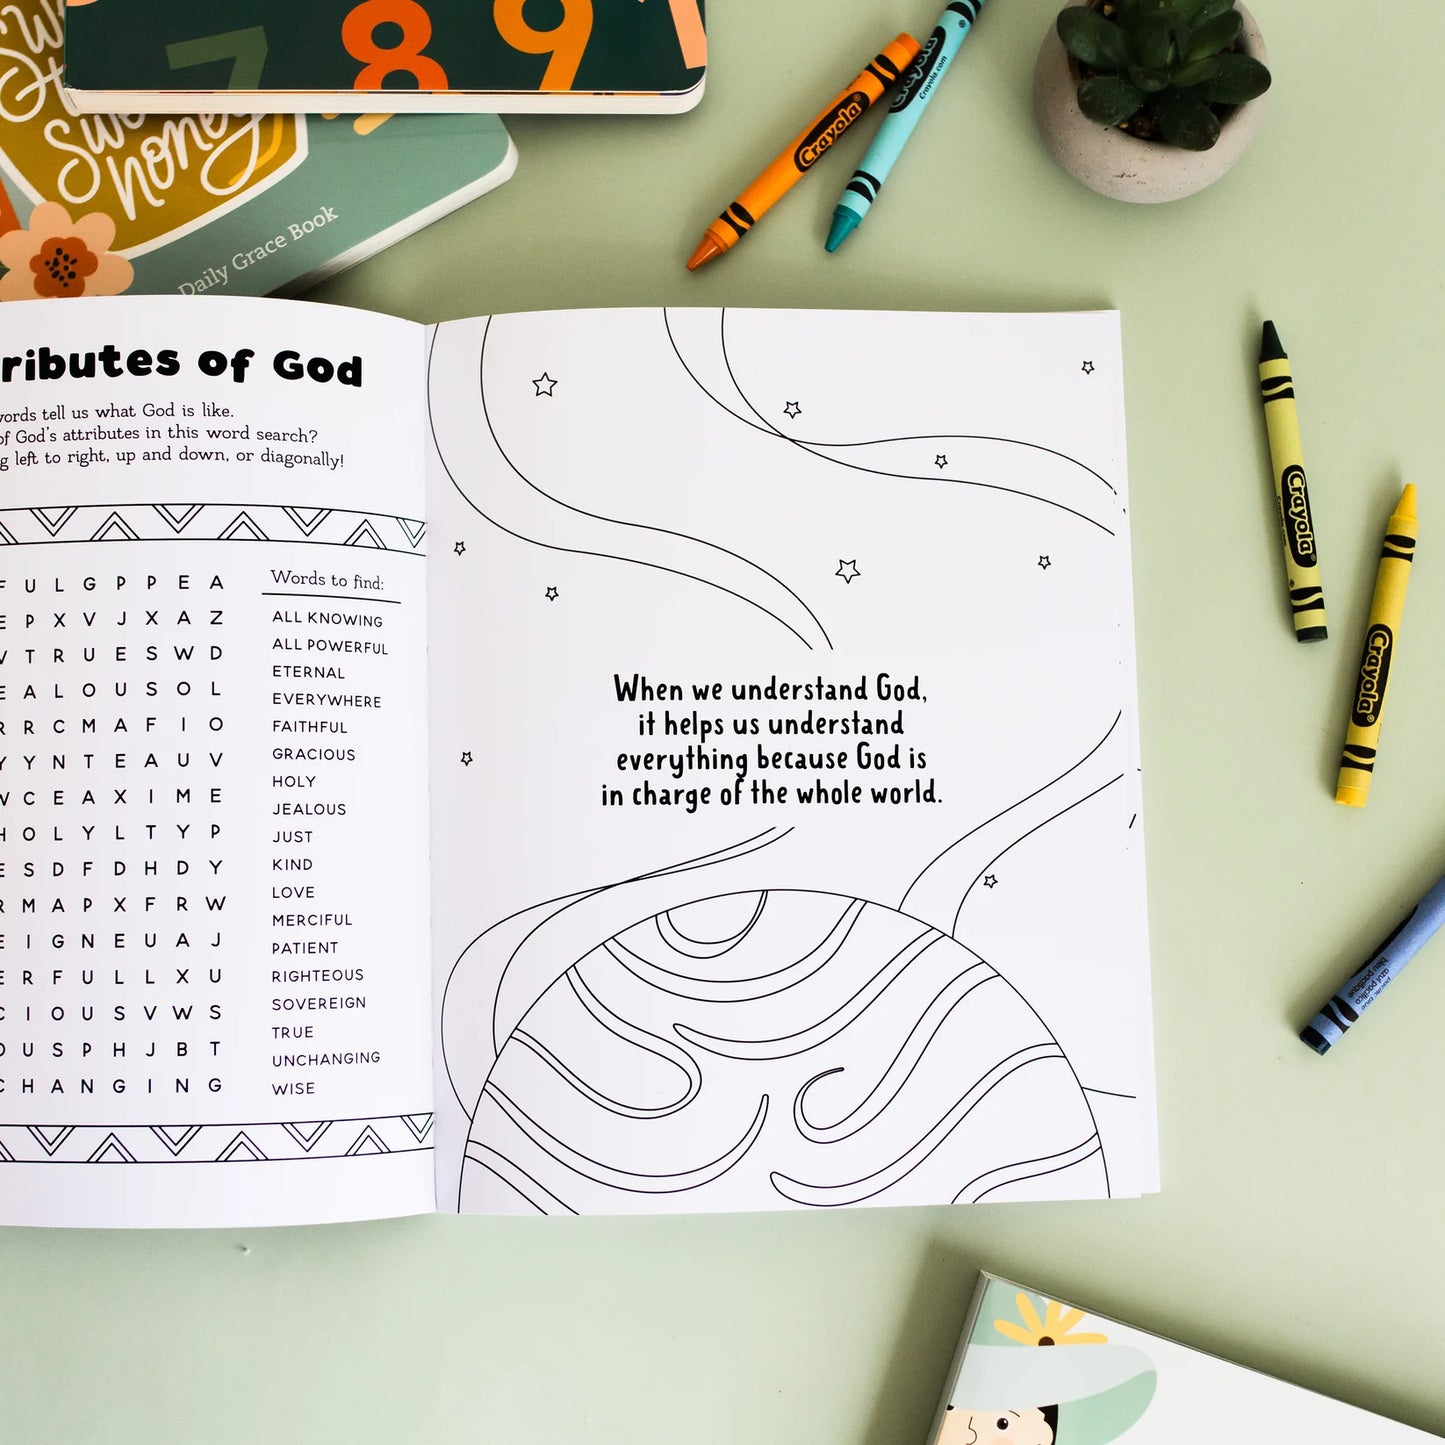 Our Great God - Coloring Book